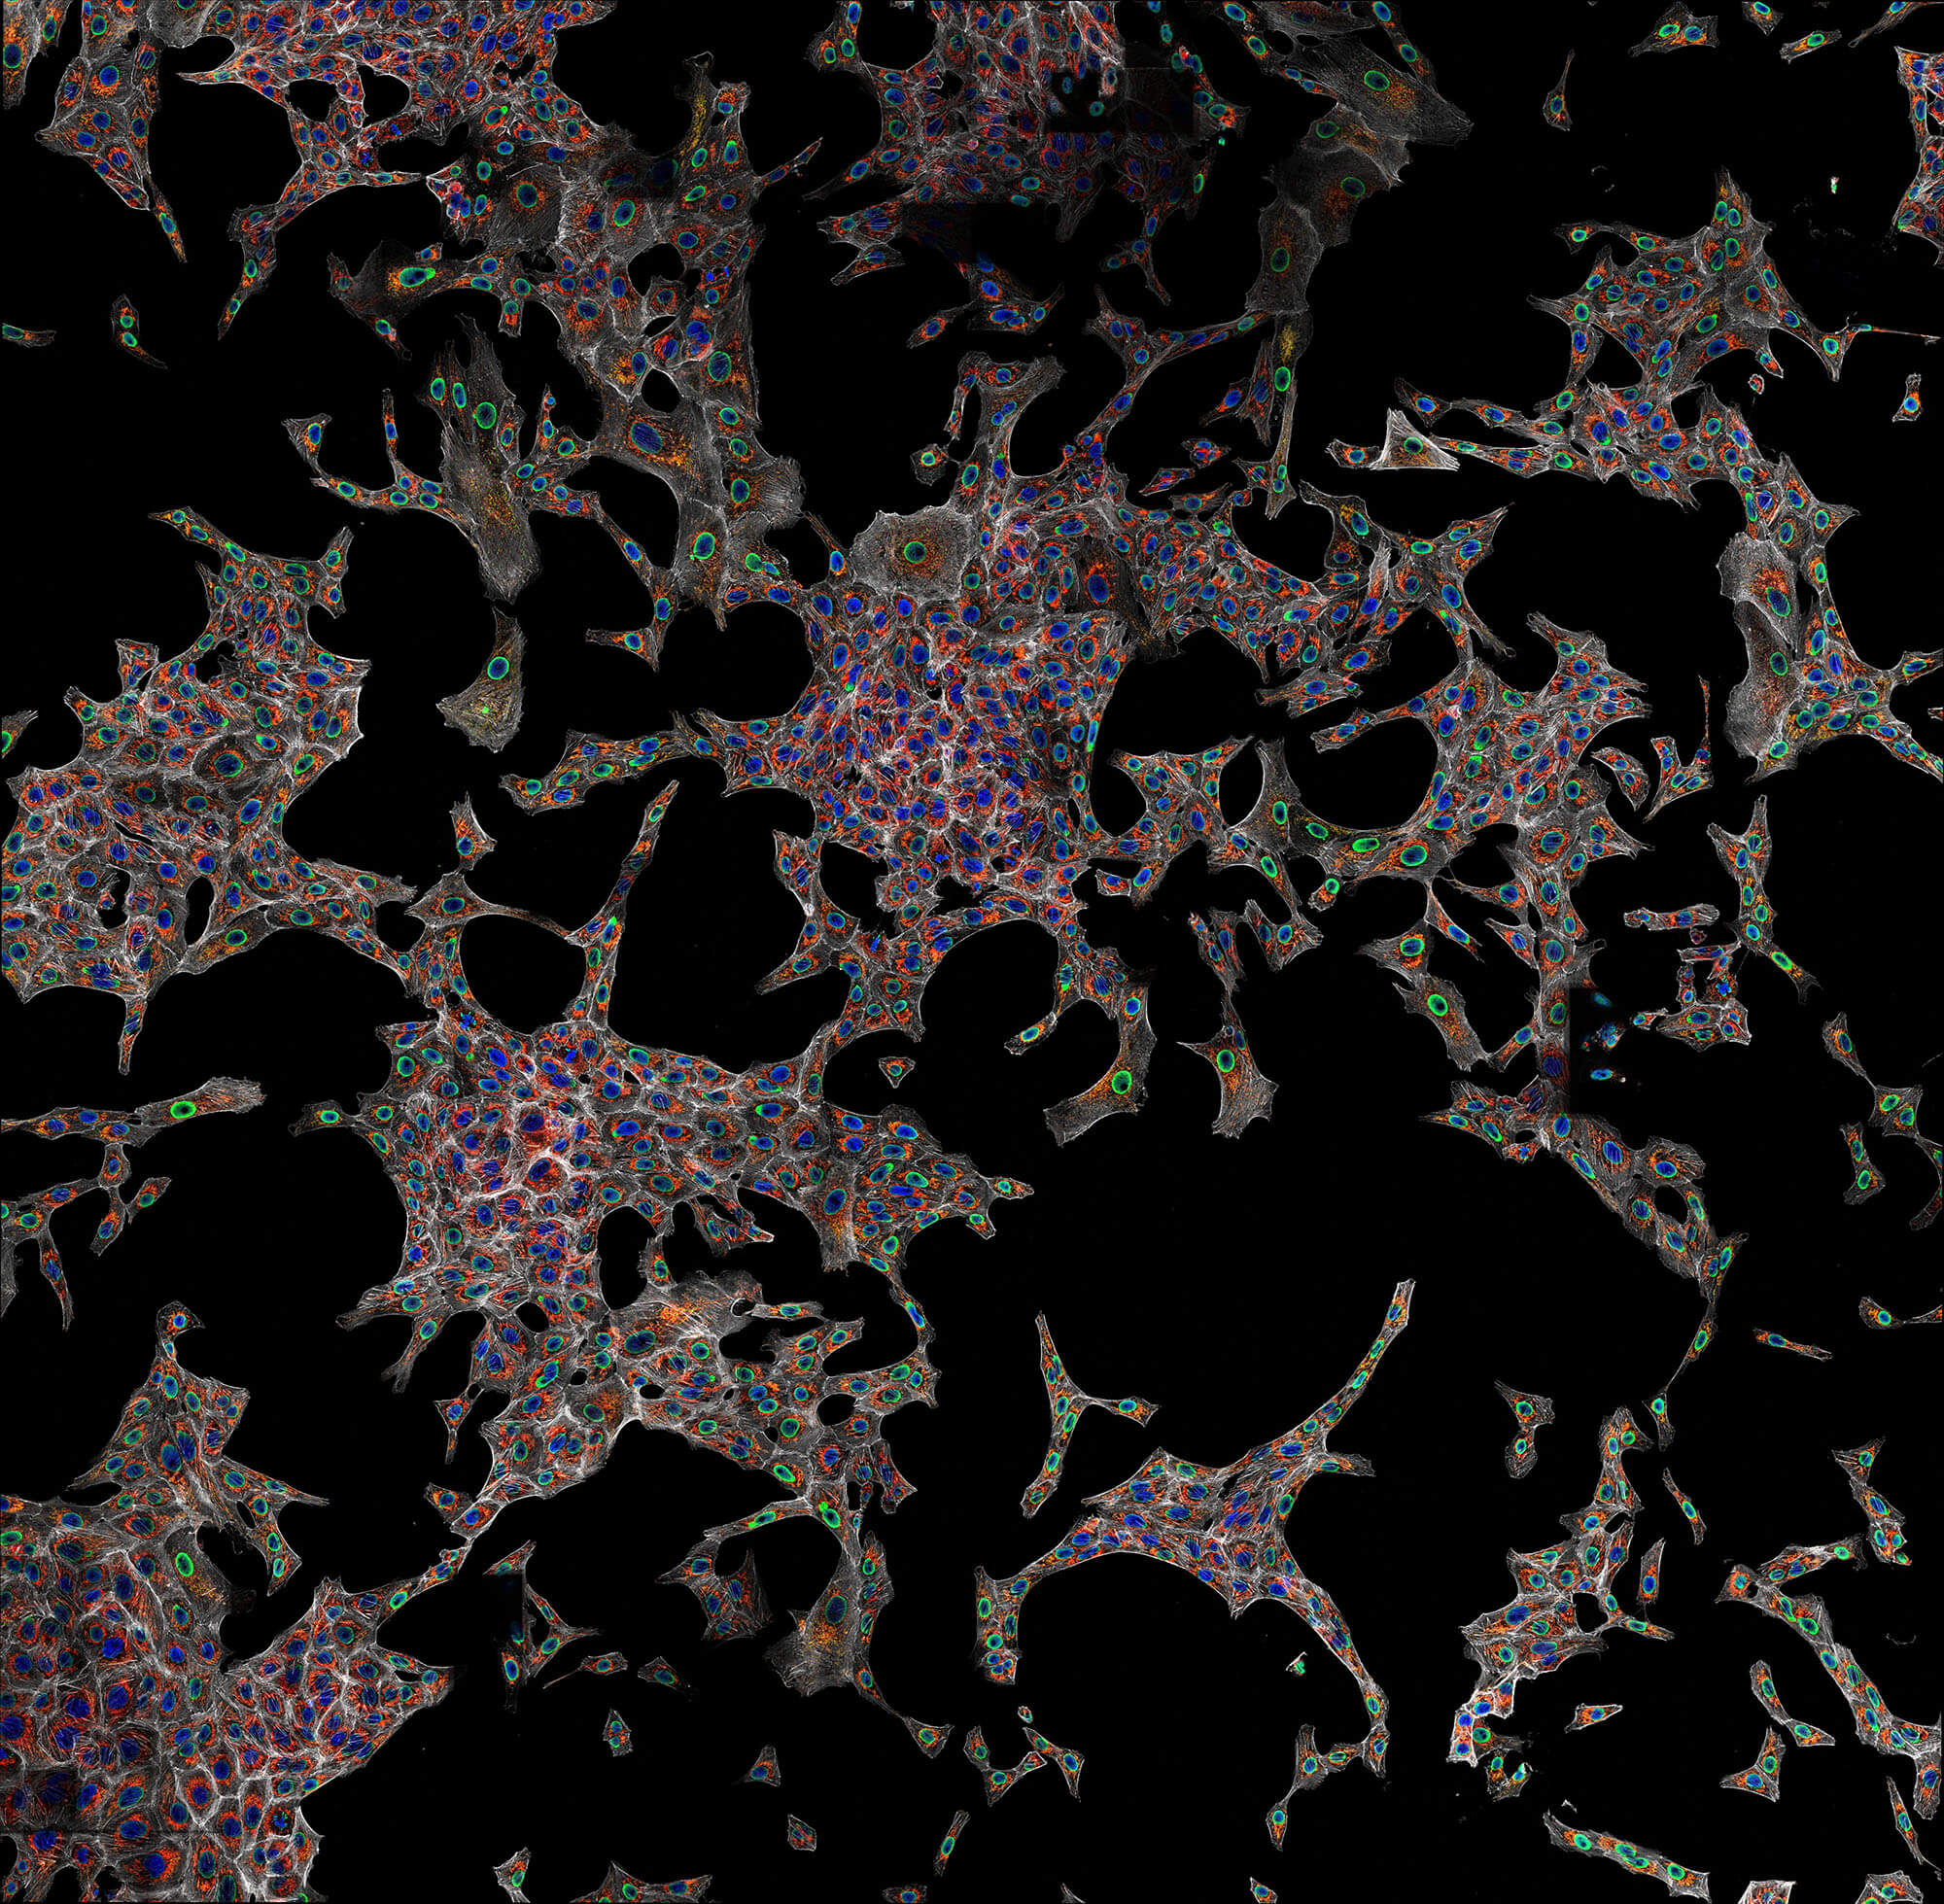 Four-color microscopic image stitched with SVI Huygens